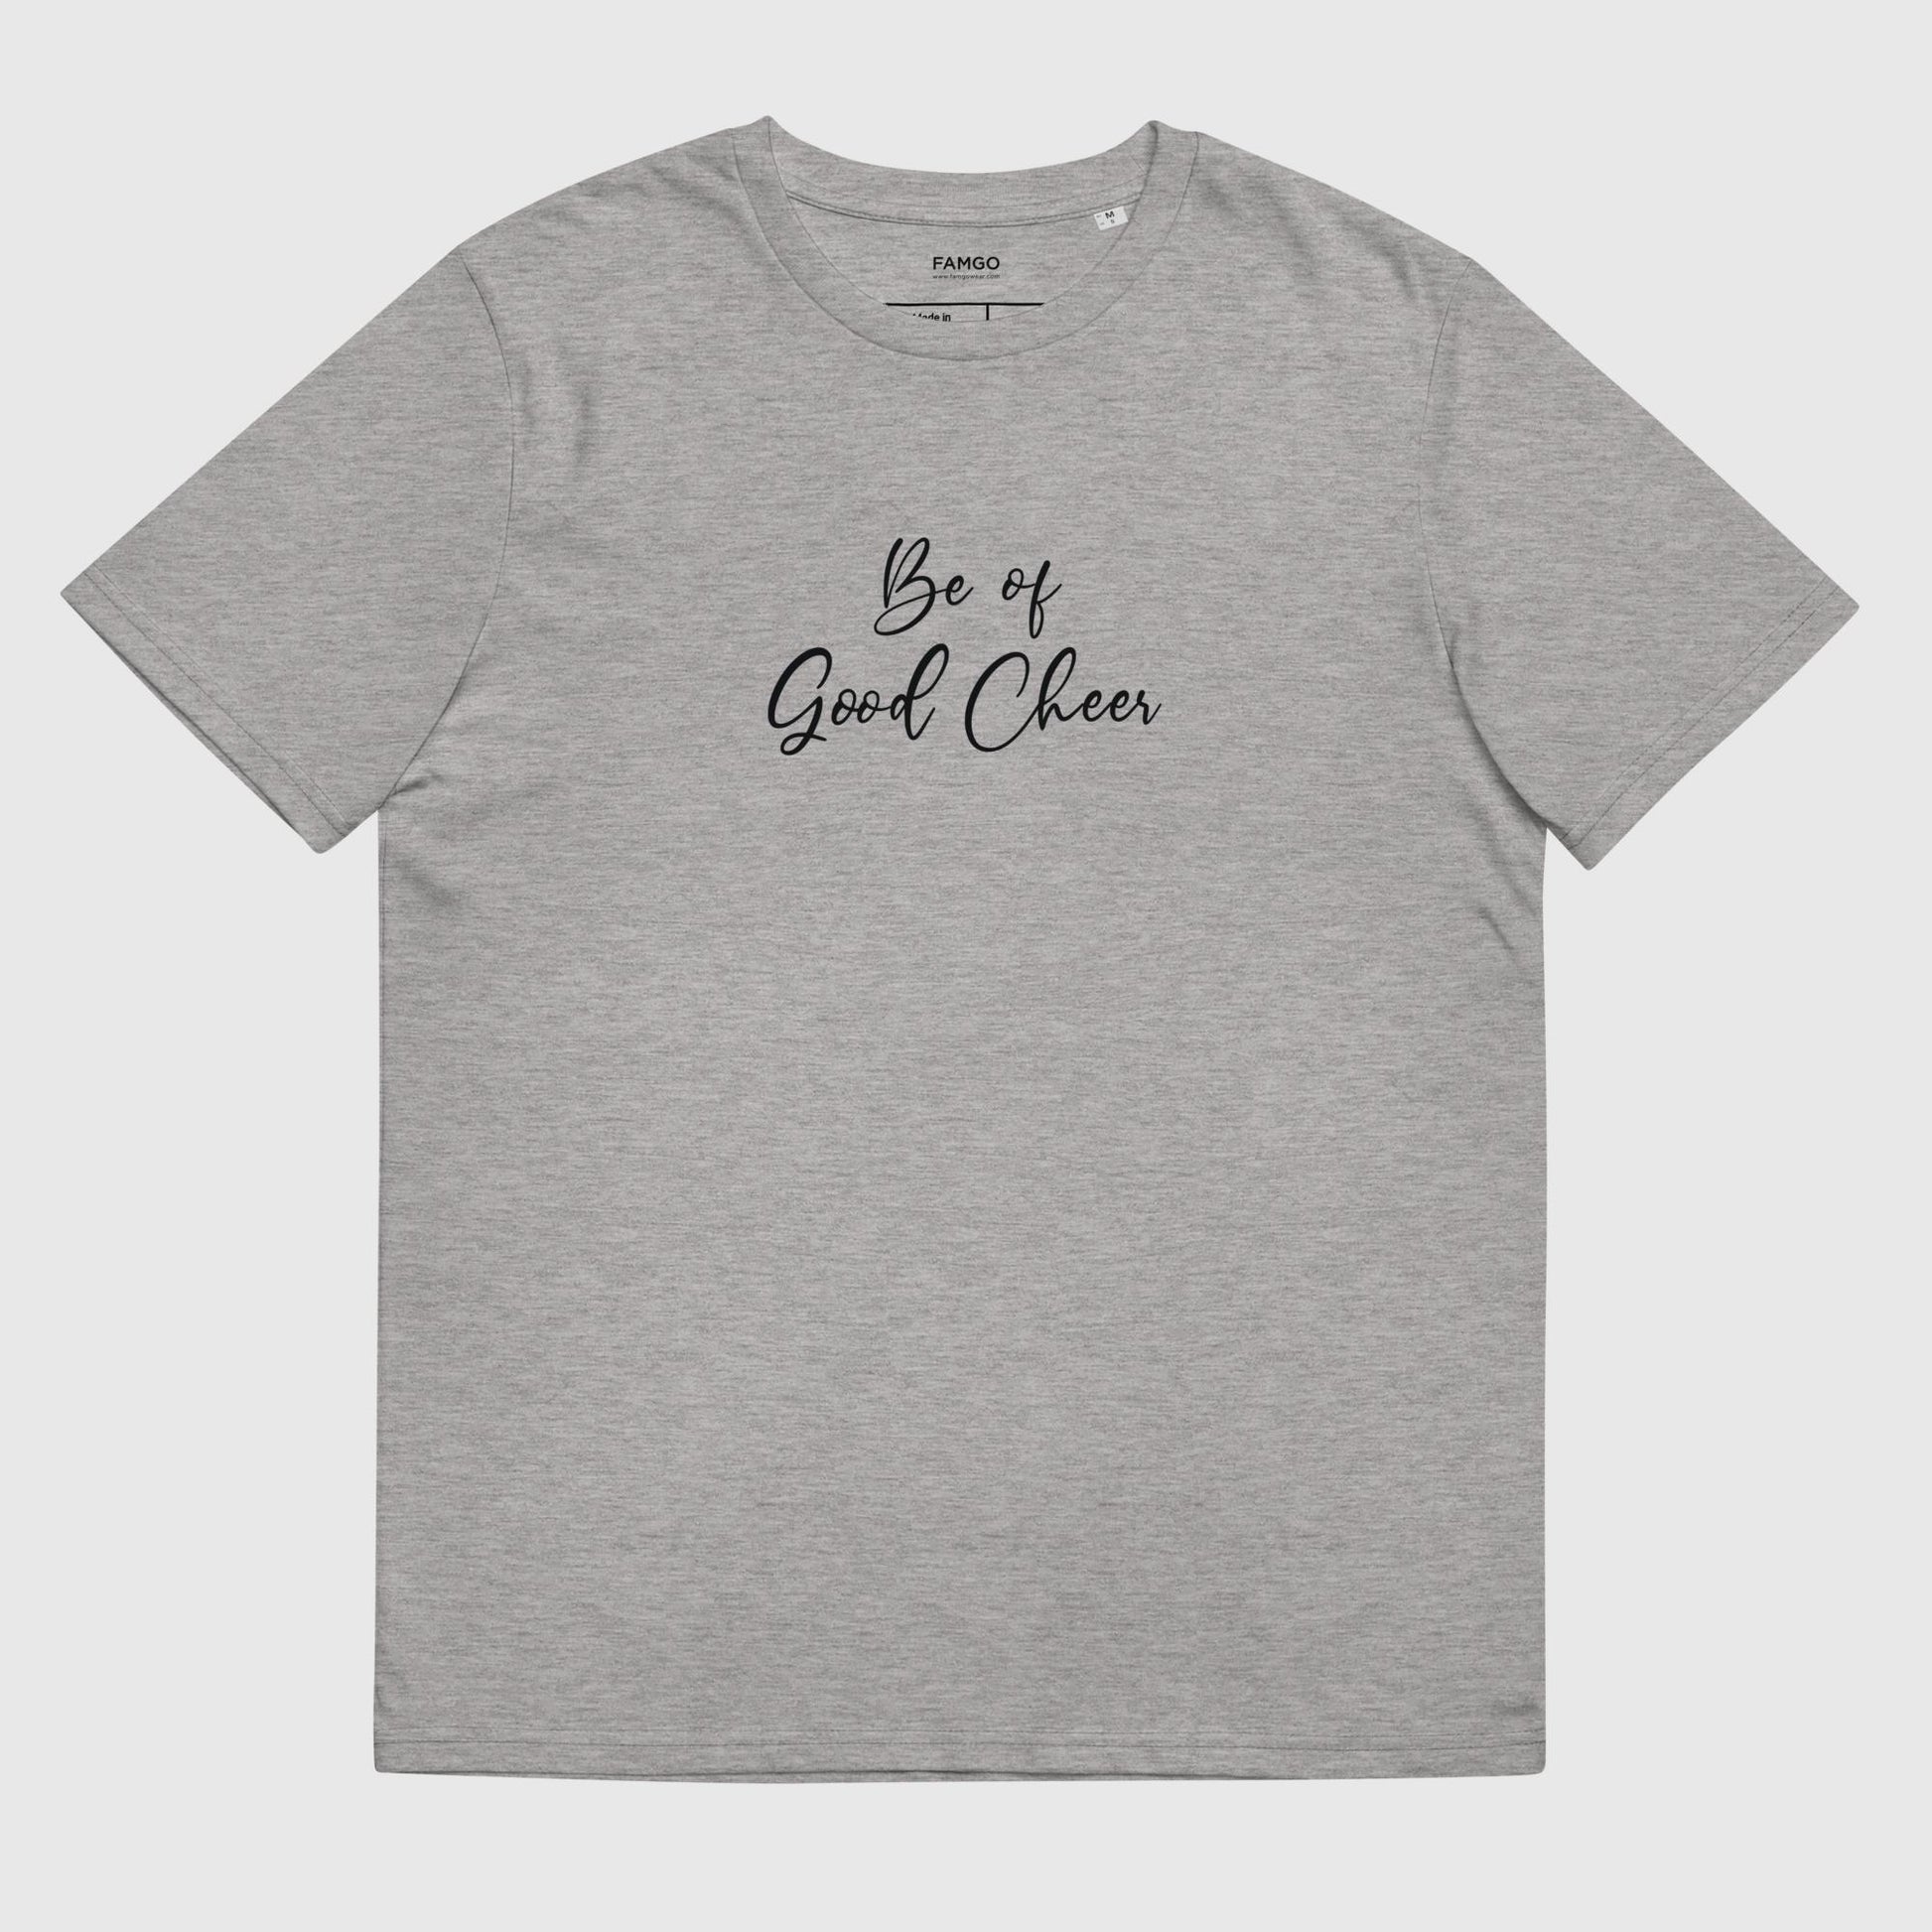 Men's heather gray organic cotton t-shirt that features the positive quote, "Be of Good Cheer."